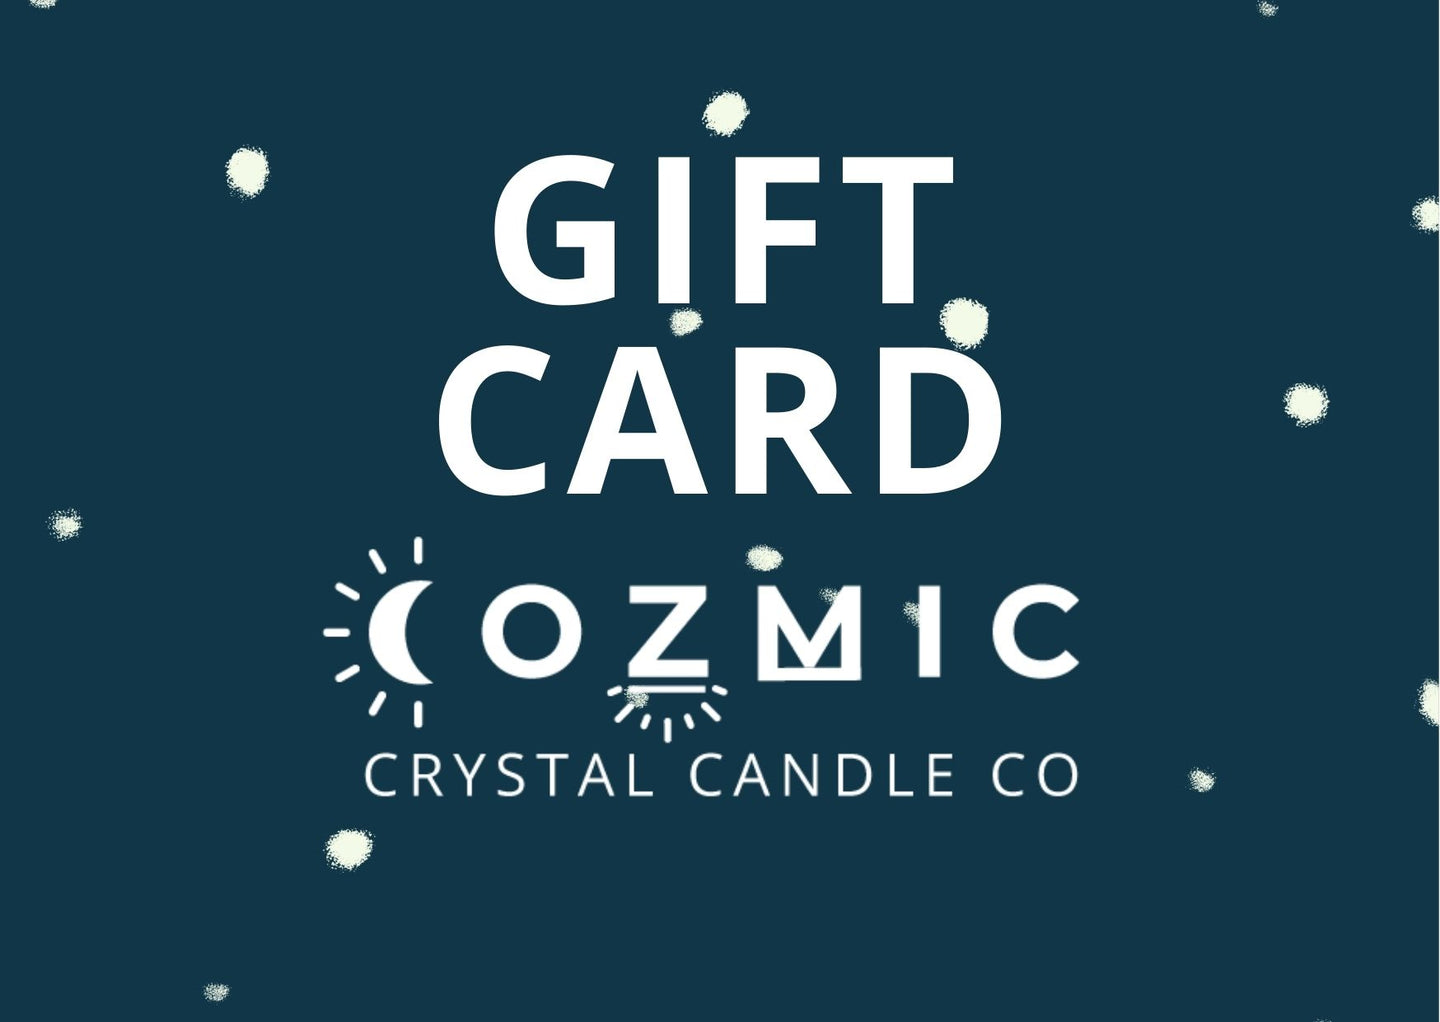 cozmic crystal candle company gift card!